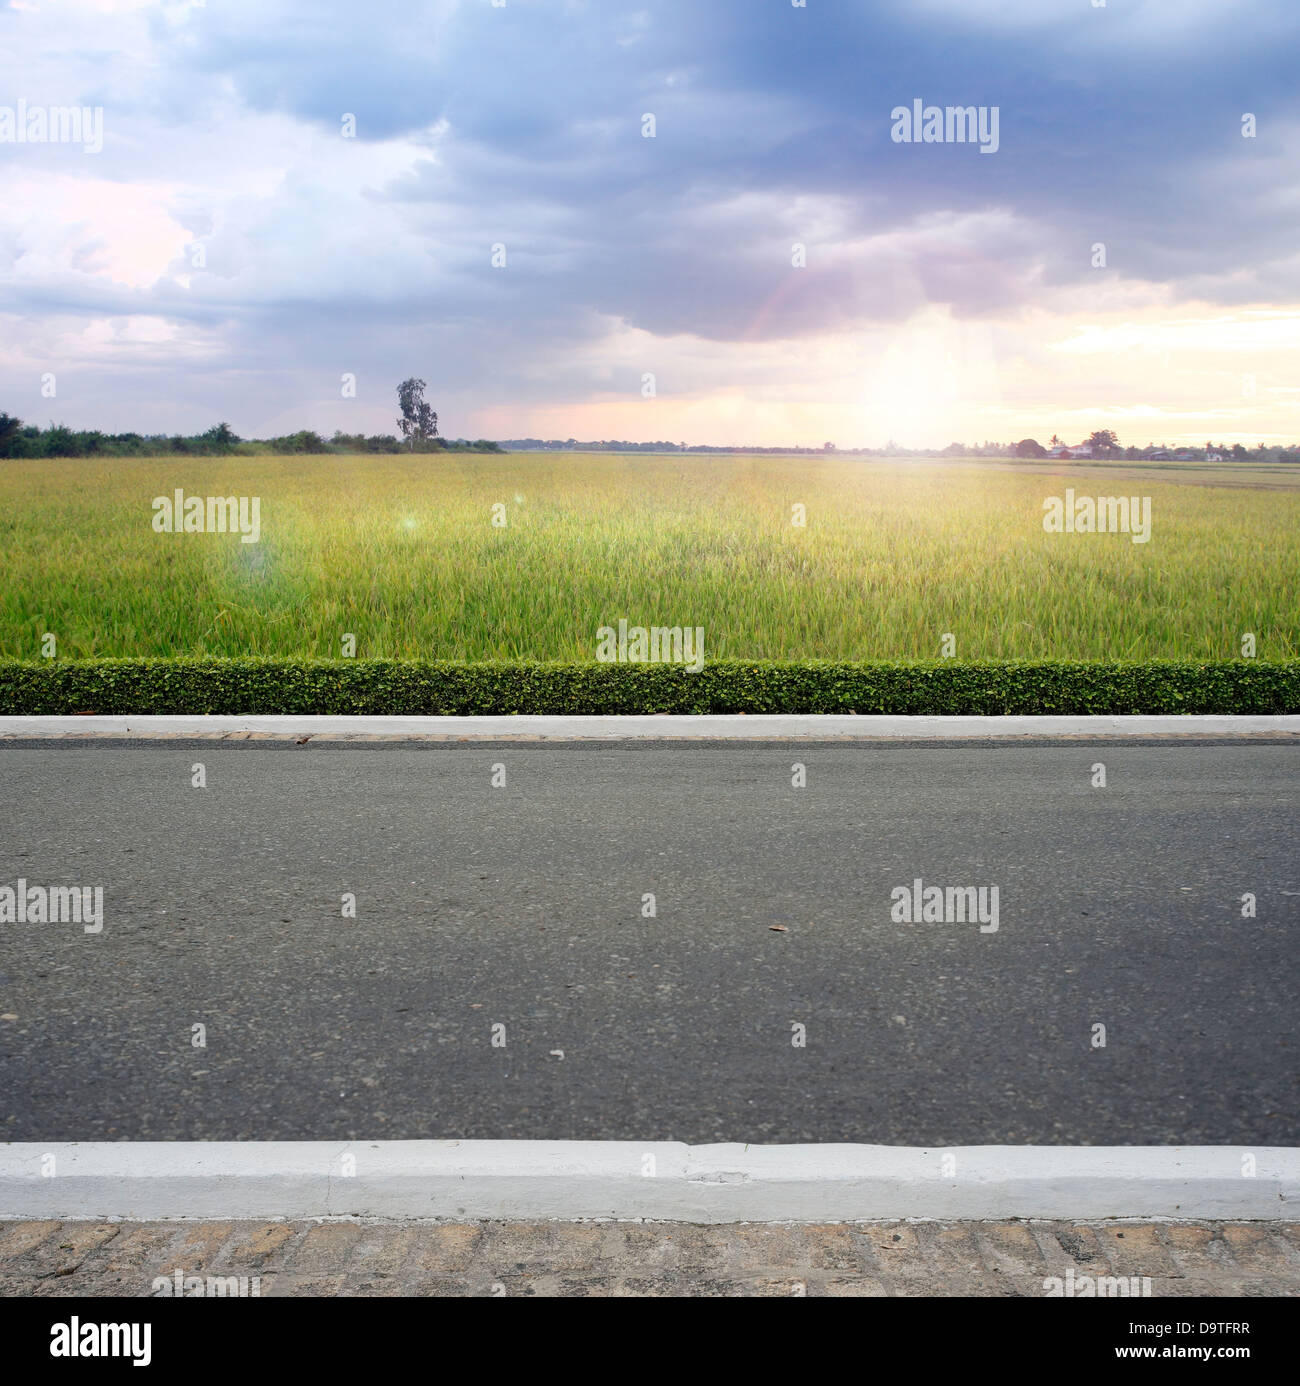 Road side county view background Stock Photo - Alamy